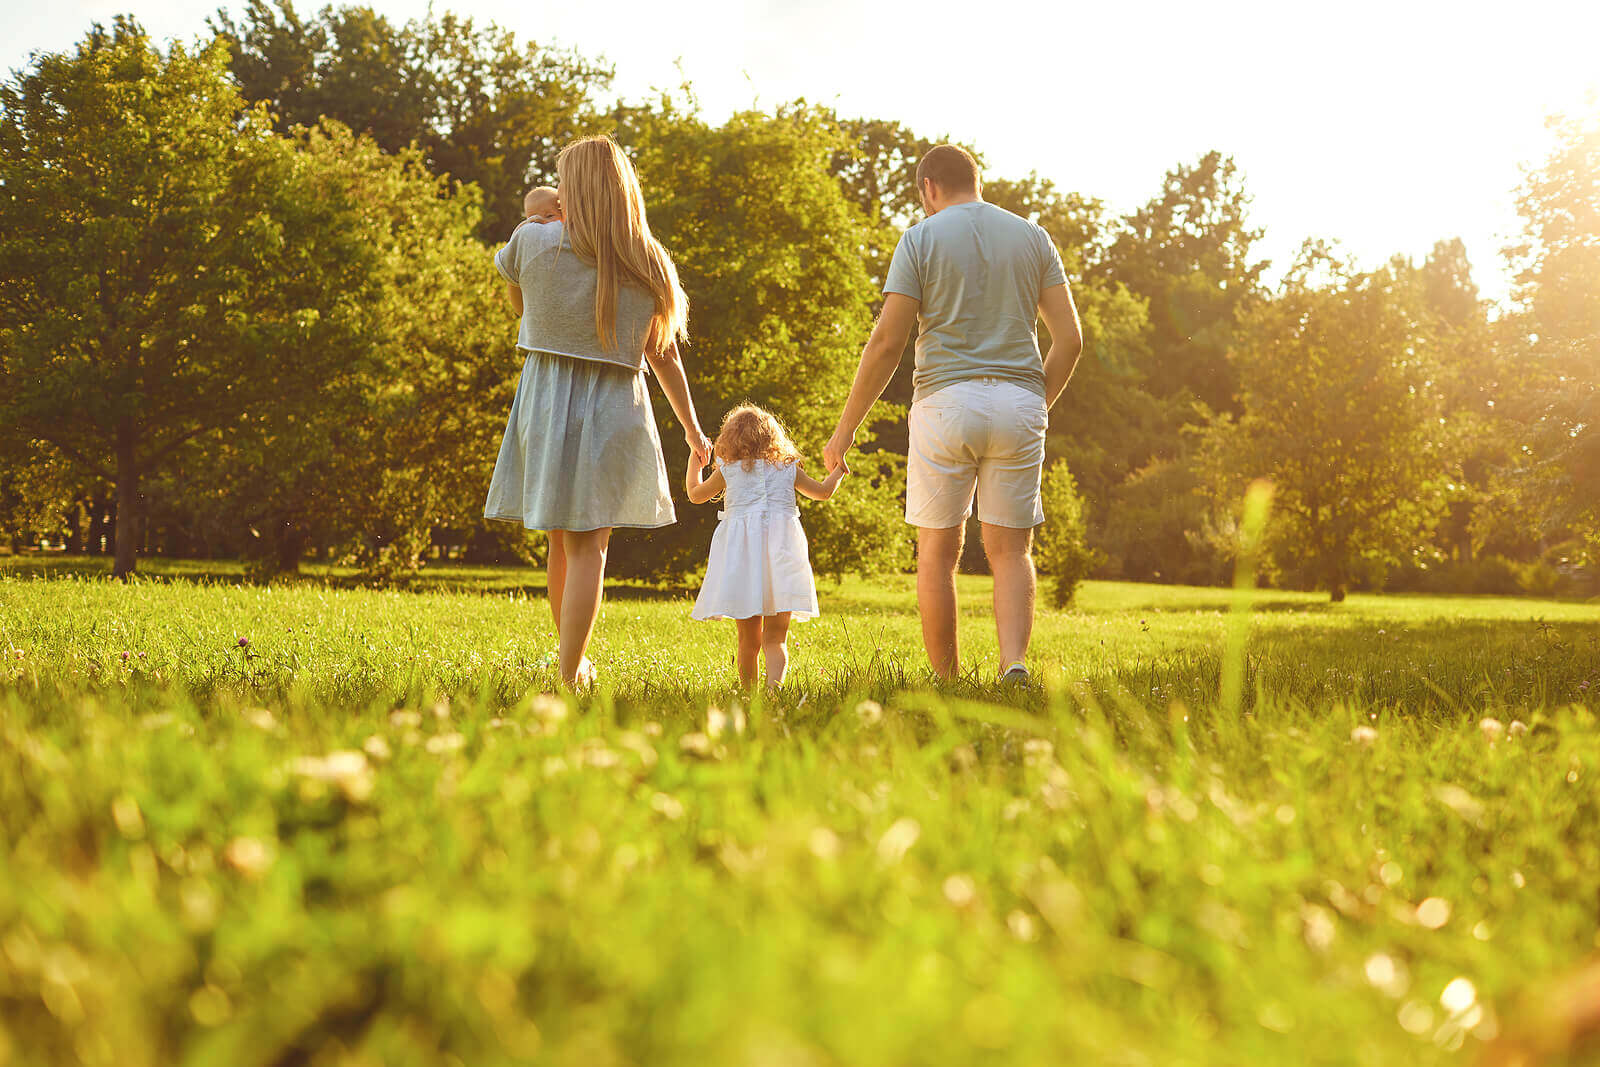 Parents walking with their young children in a field on a sunny day.